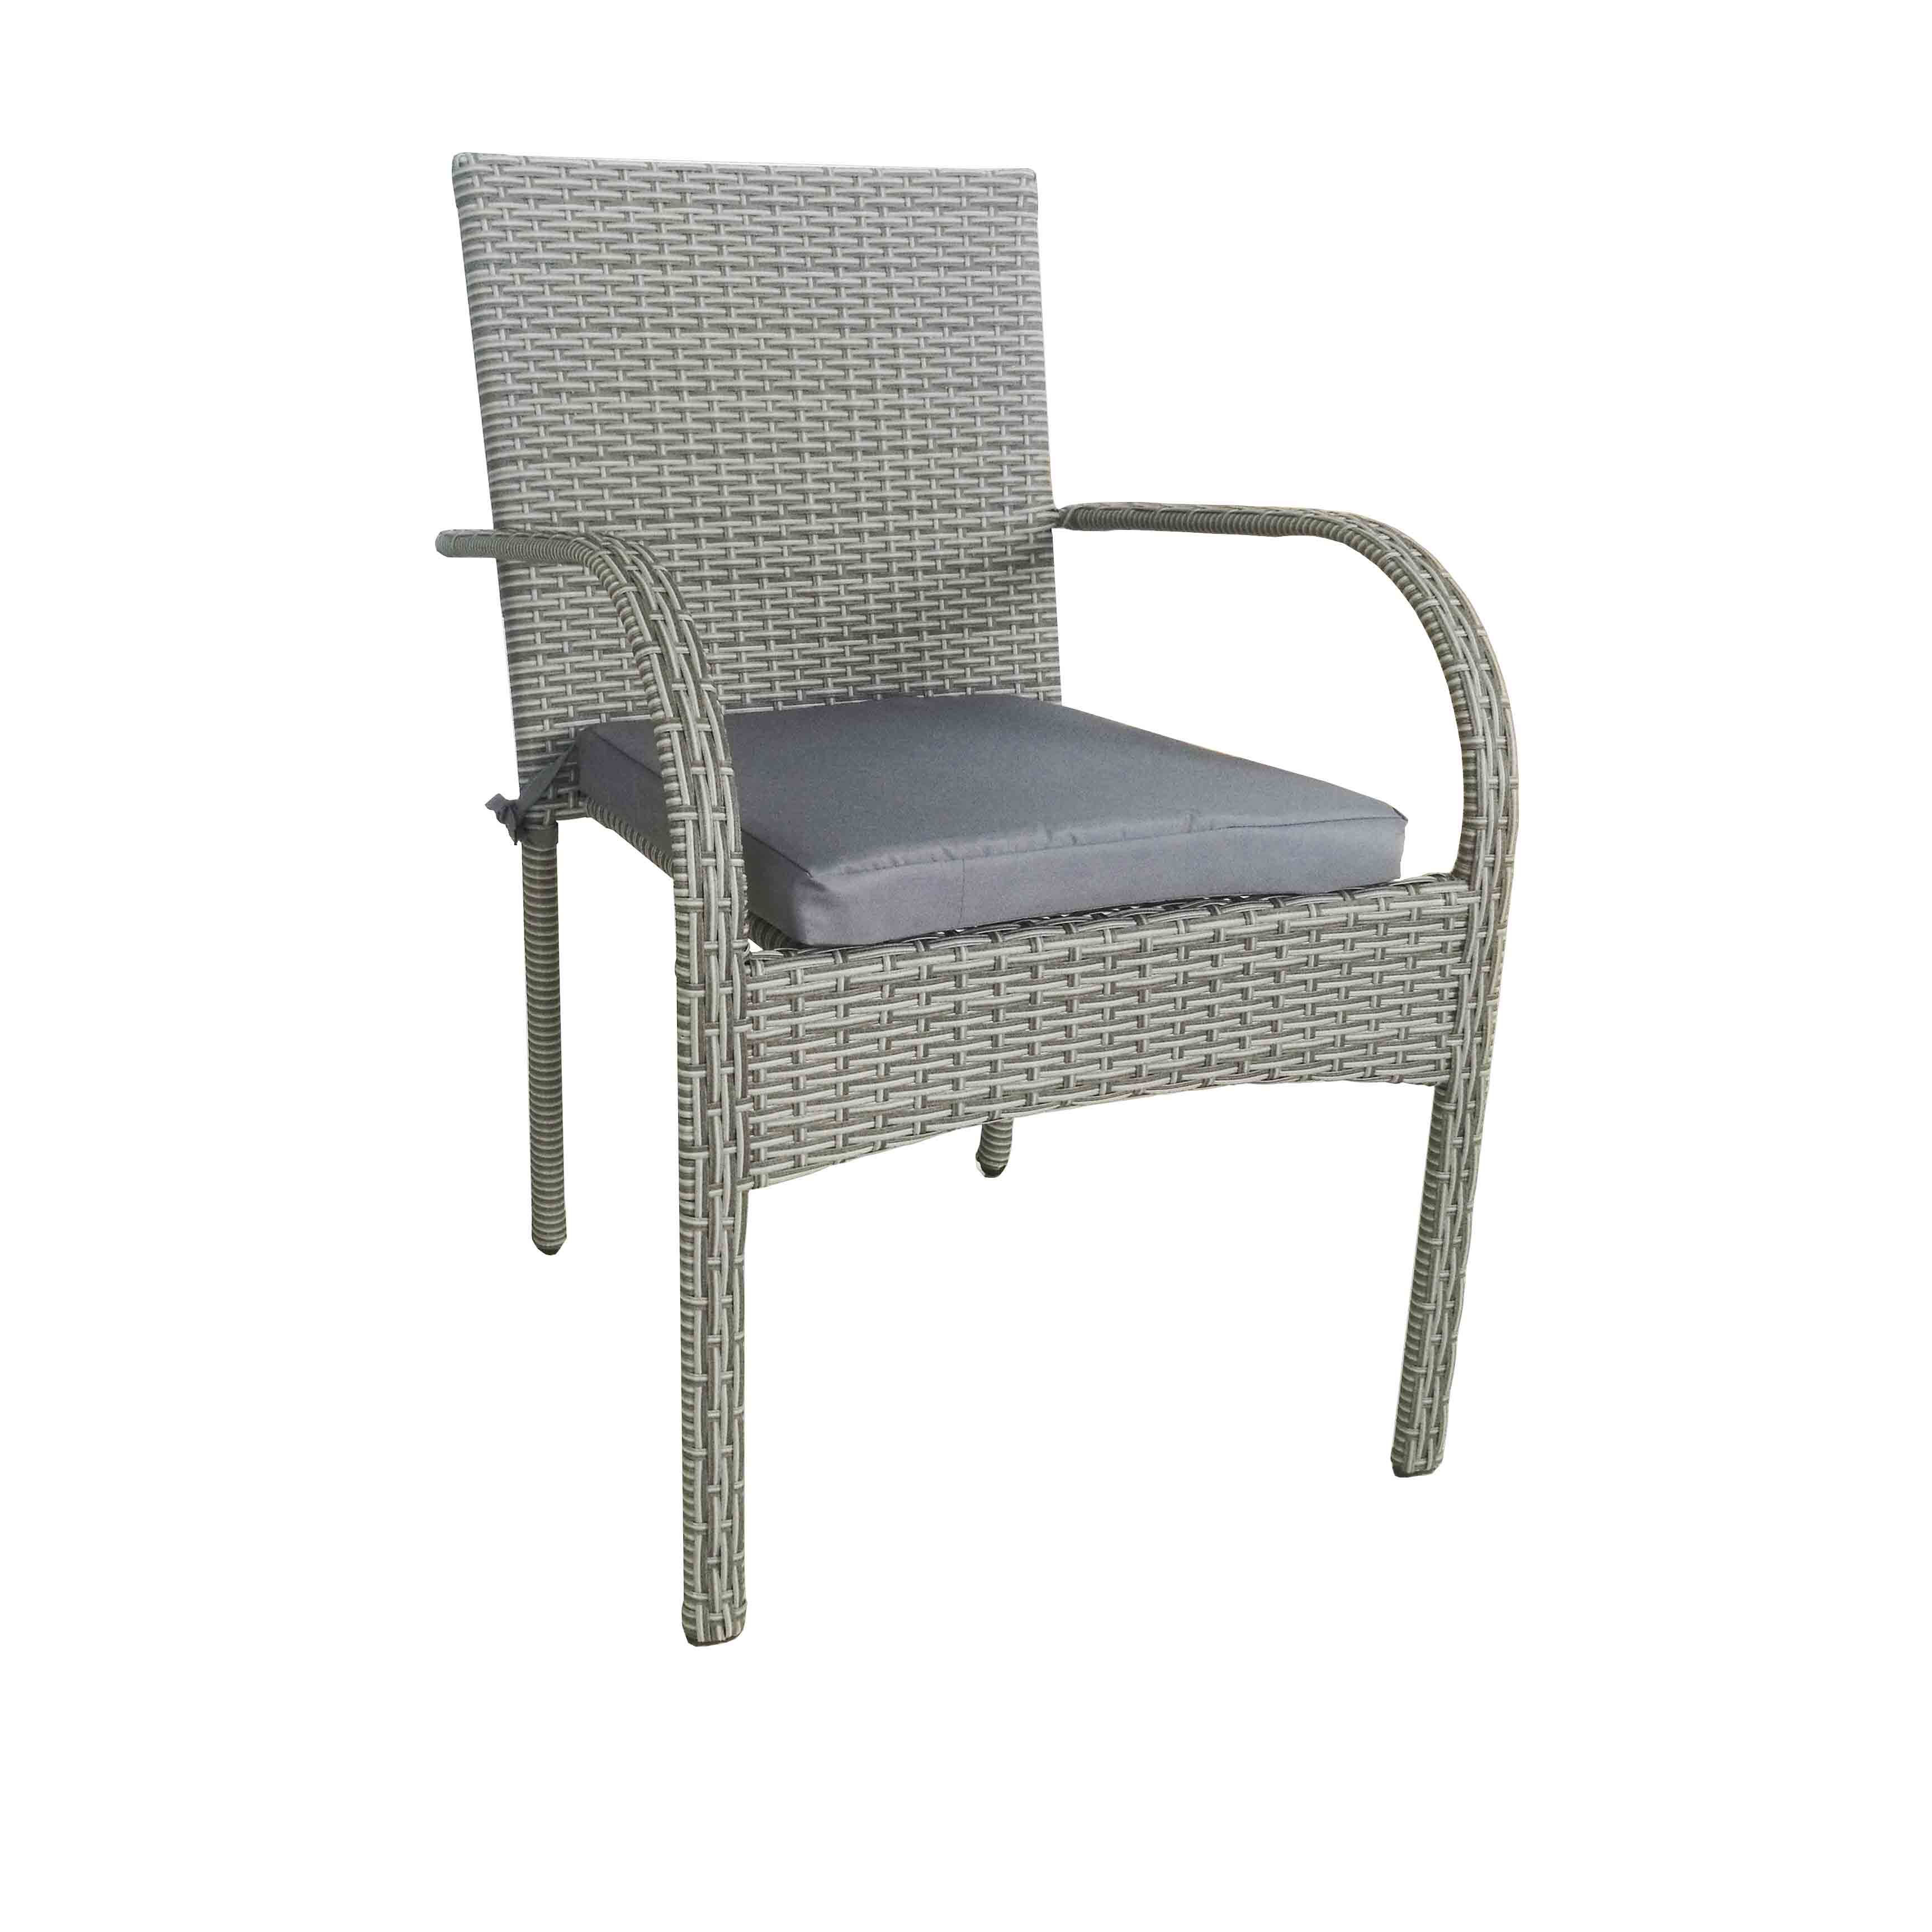 JJC3190 Steel rattan stackable dinning chair Featured Image